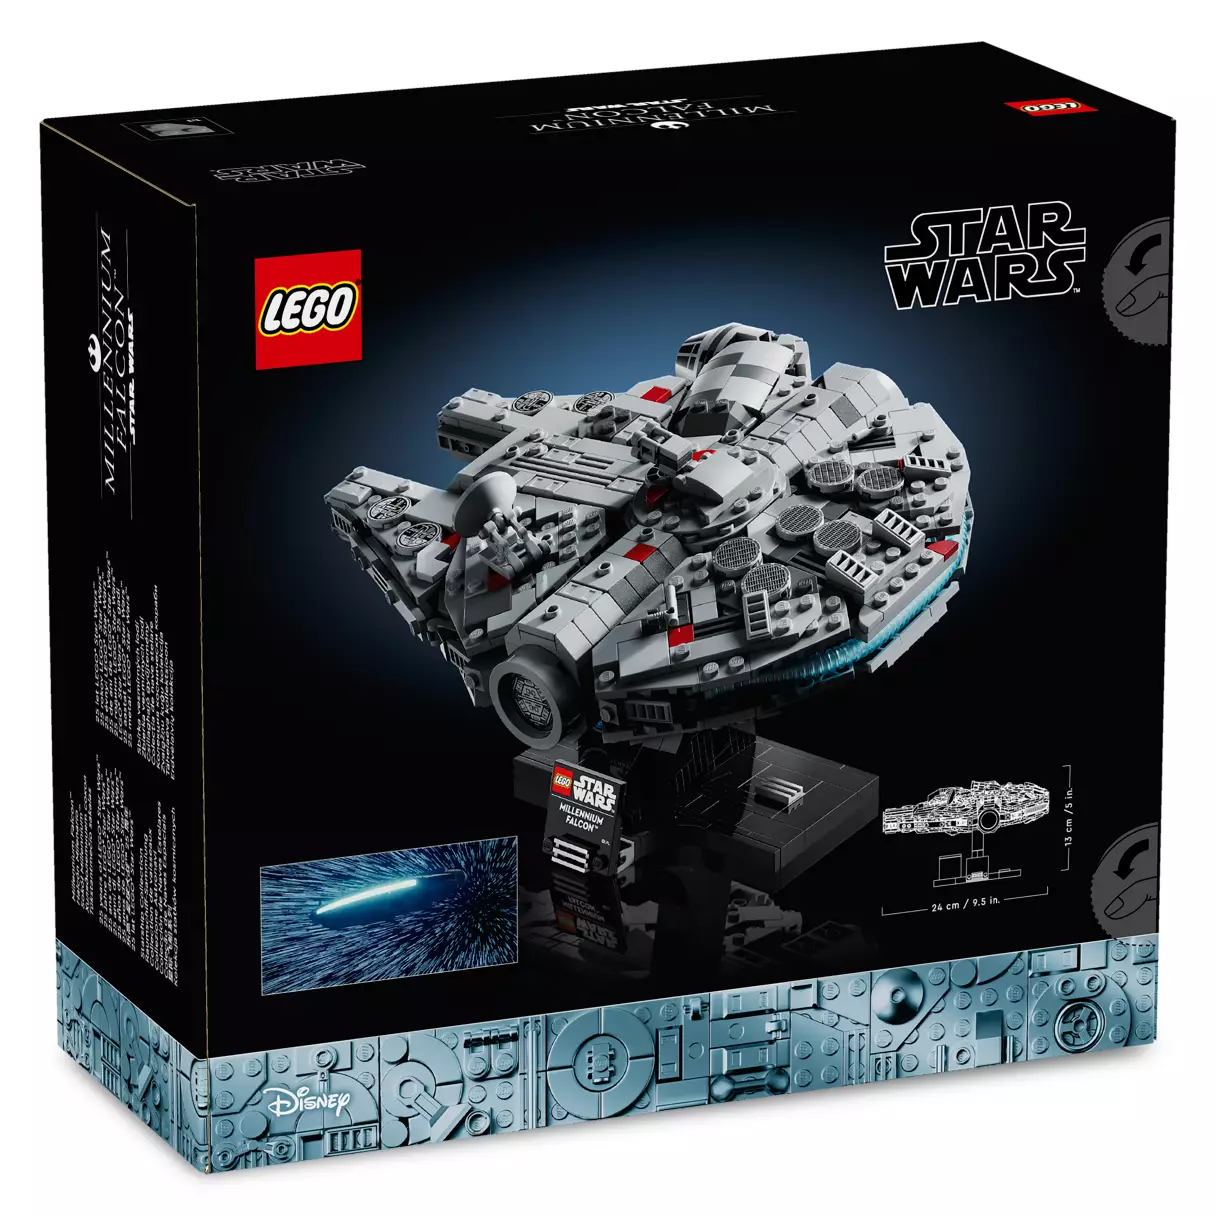 ANH Millennium Falcon Build-and-Display Starship Model Lego Set 2